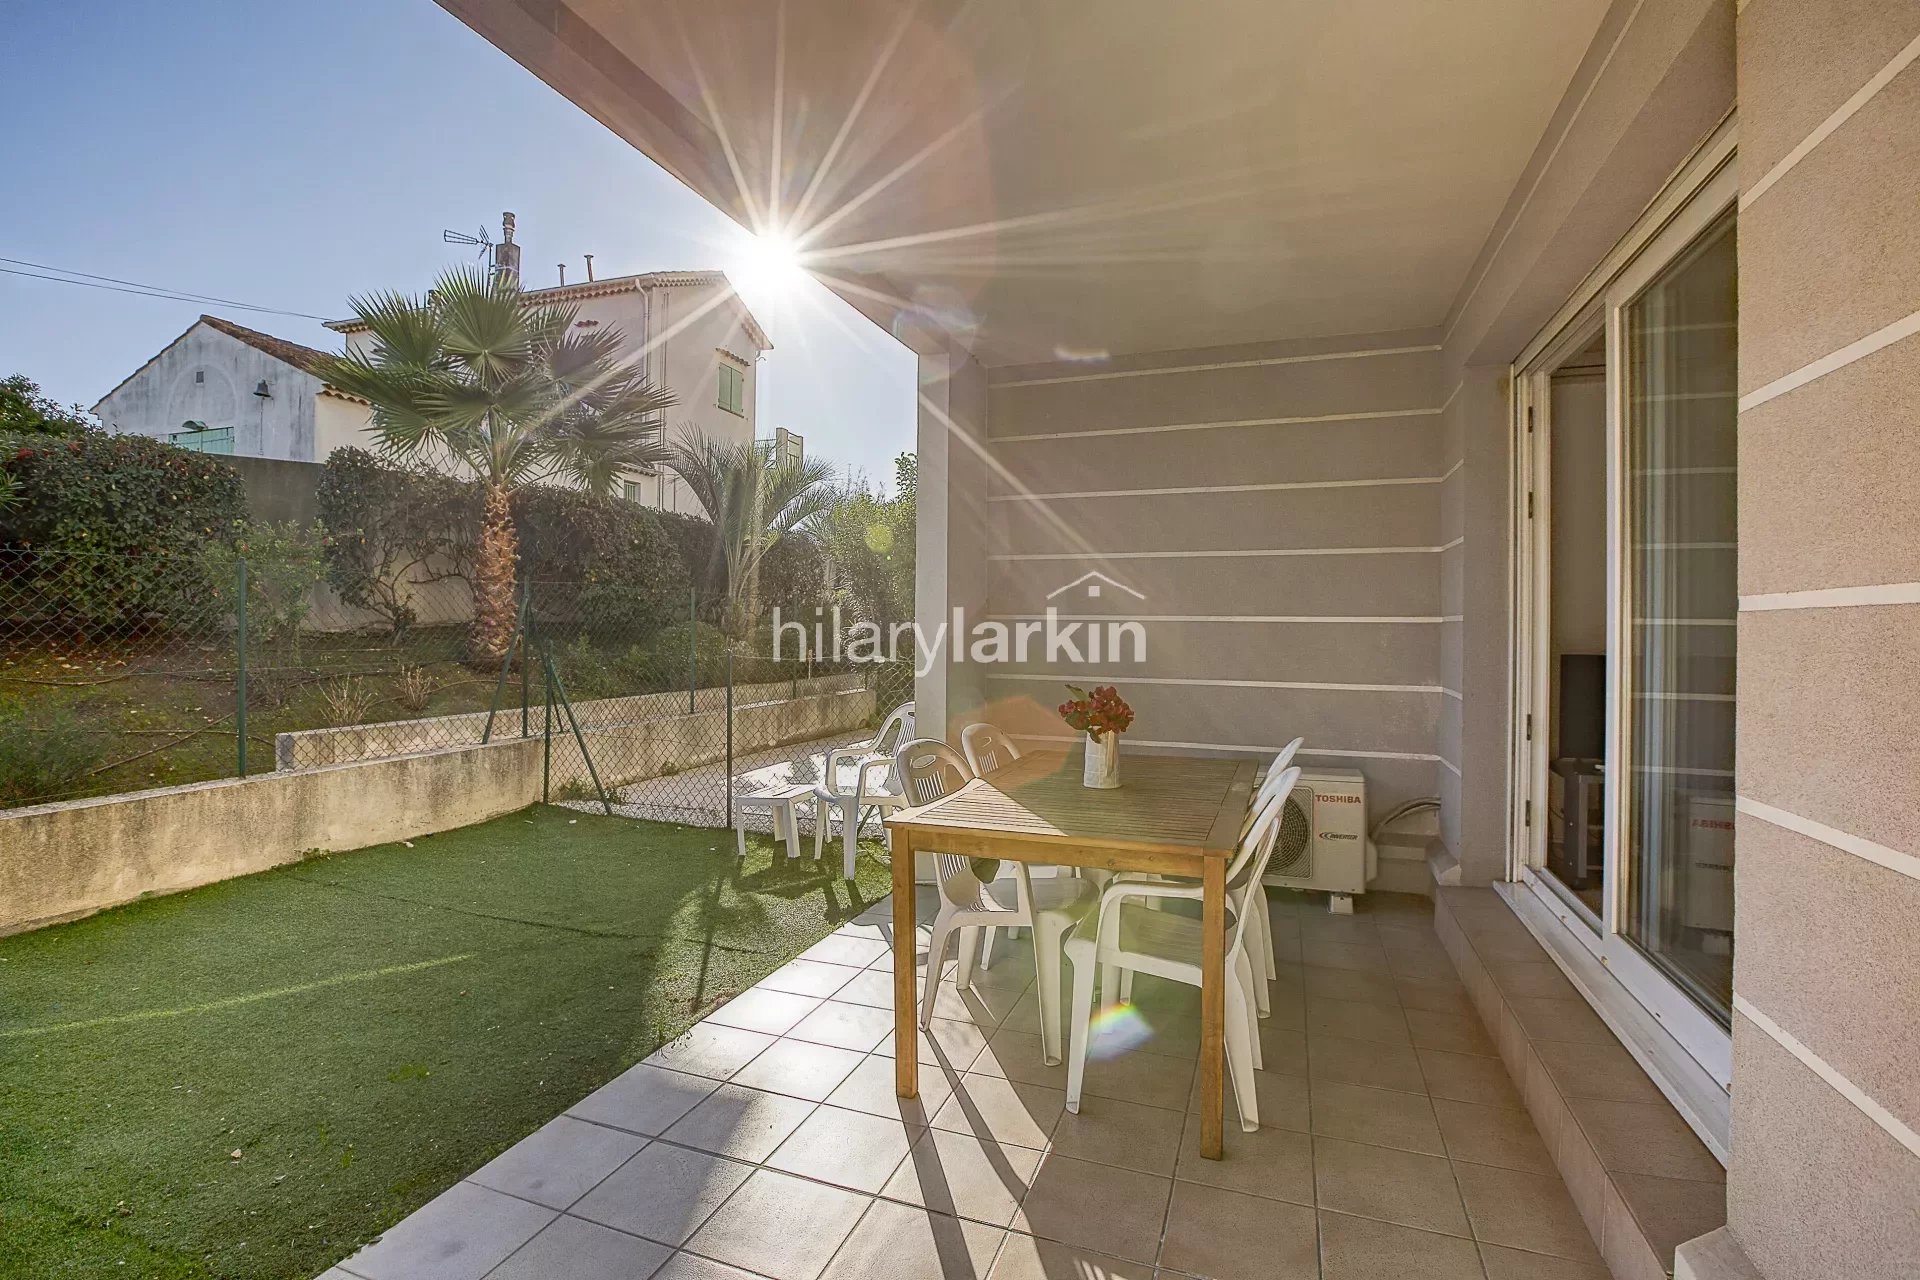 Spacious & quiet 2 bedroom garden apartment in a recent residence with pool, close to the center of Cannes